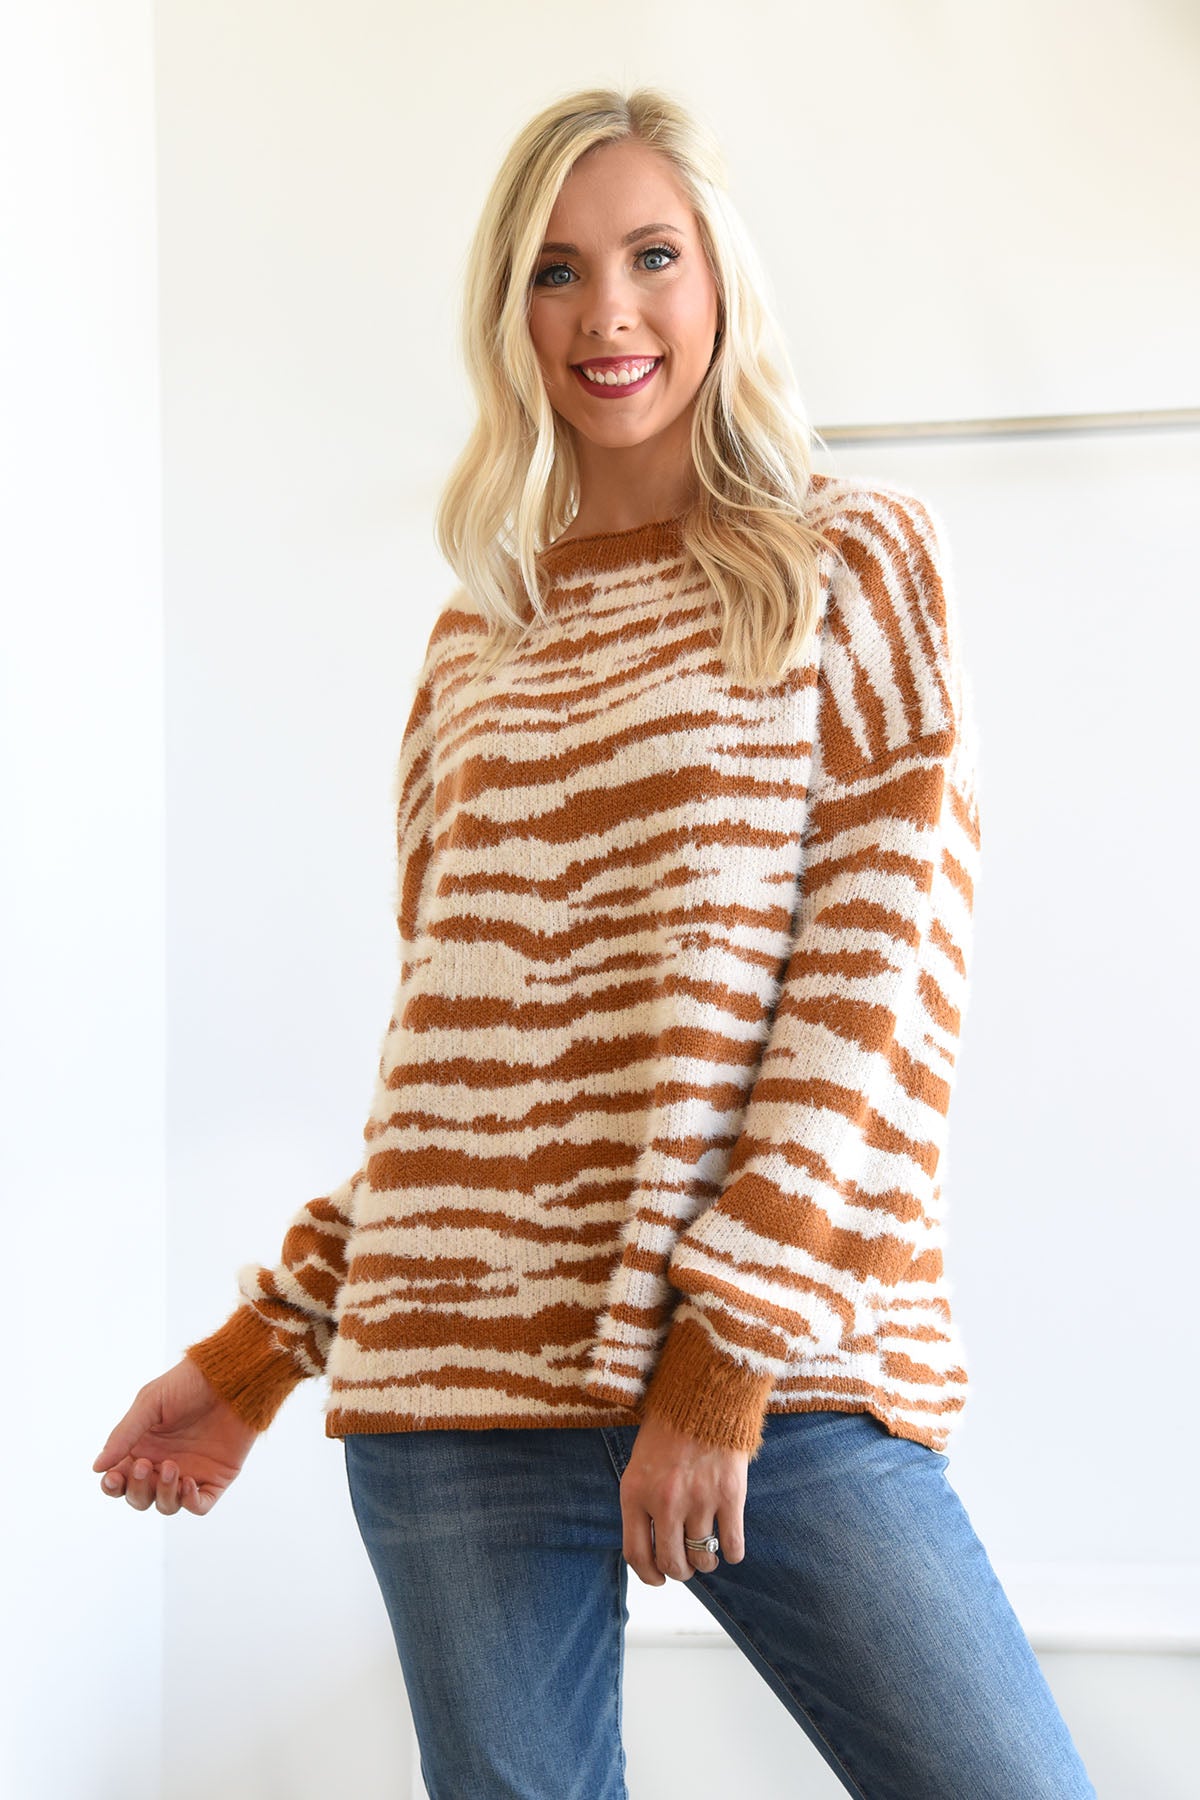 NEVER GOING HOME SWEATER - Dear Stella Boutique